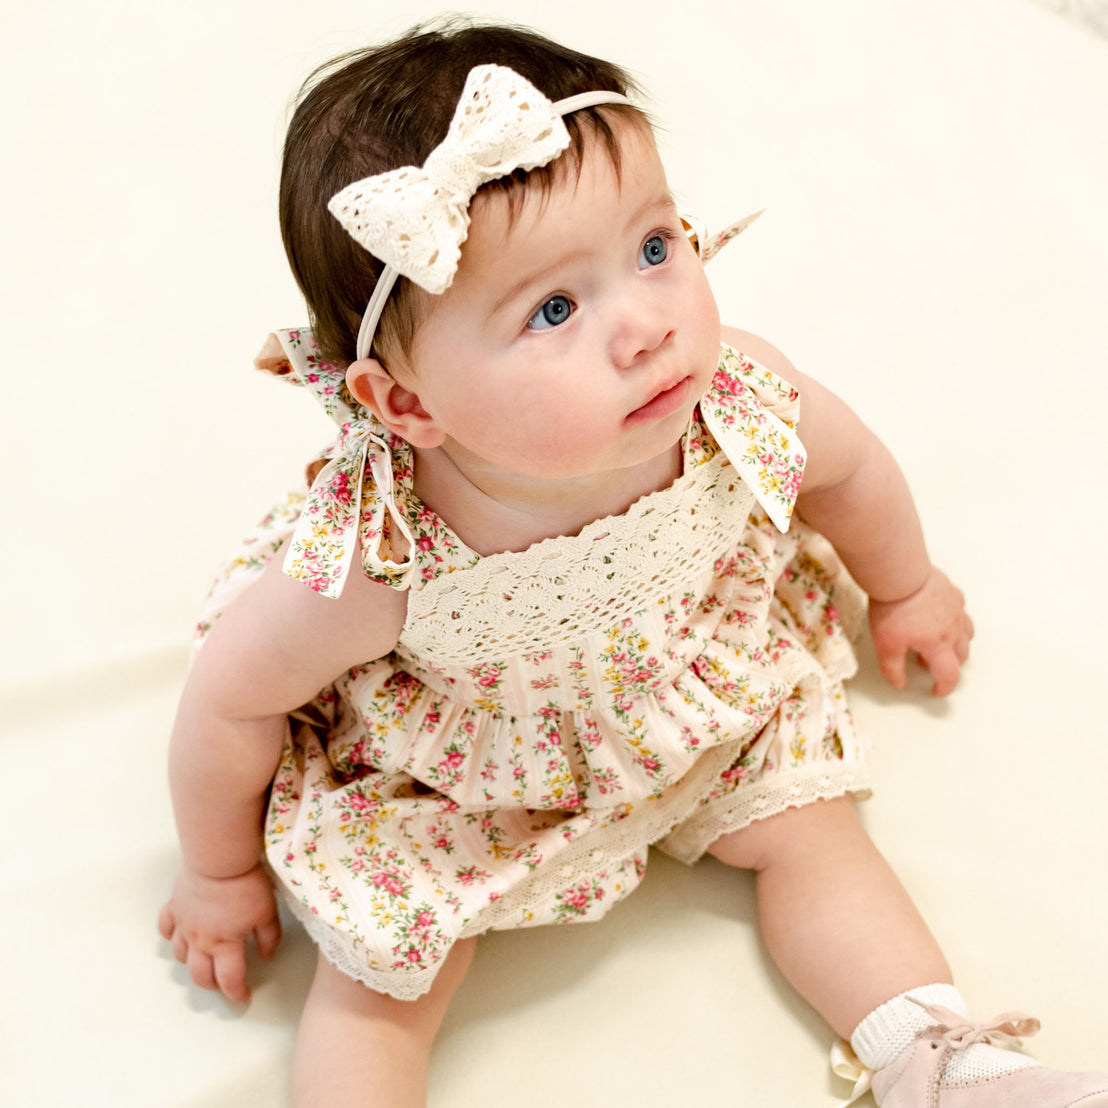 Baby girl wearing the "Blush" Eloise Romper Dress with matching Eloise Bow Headband.